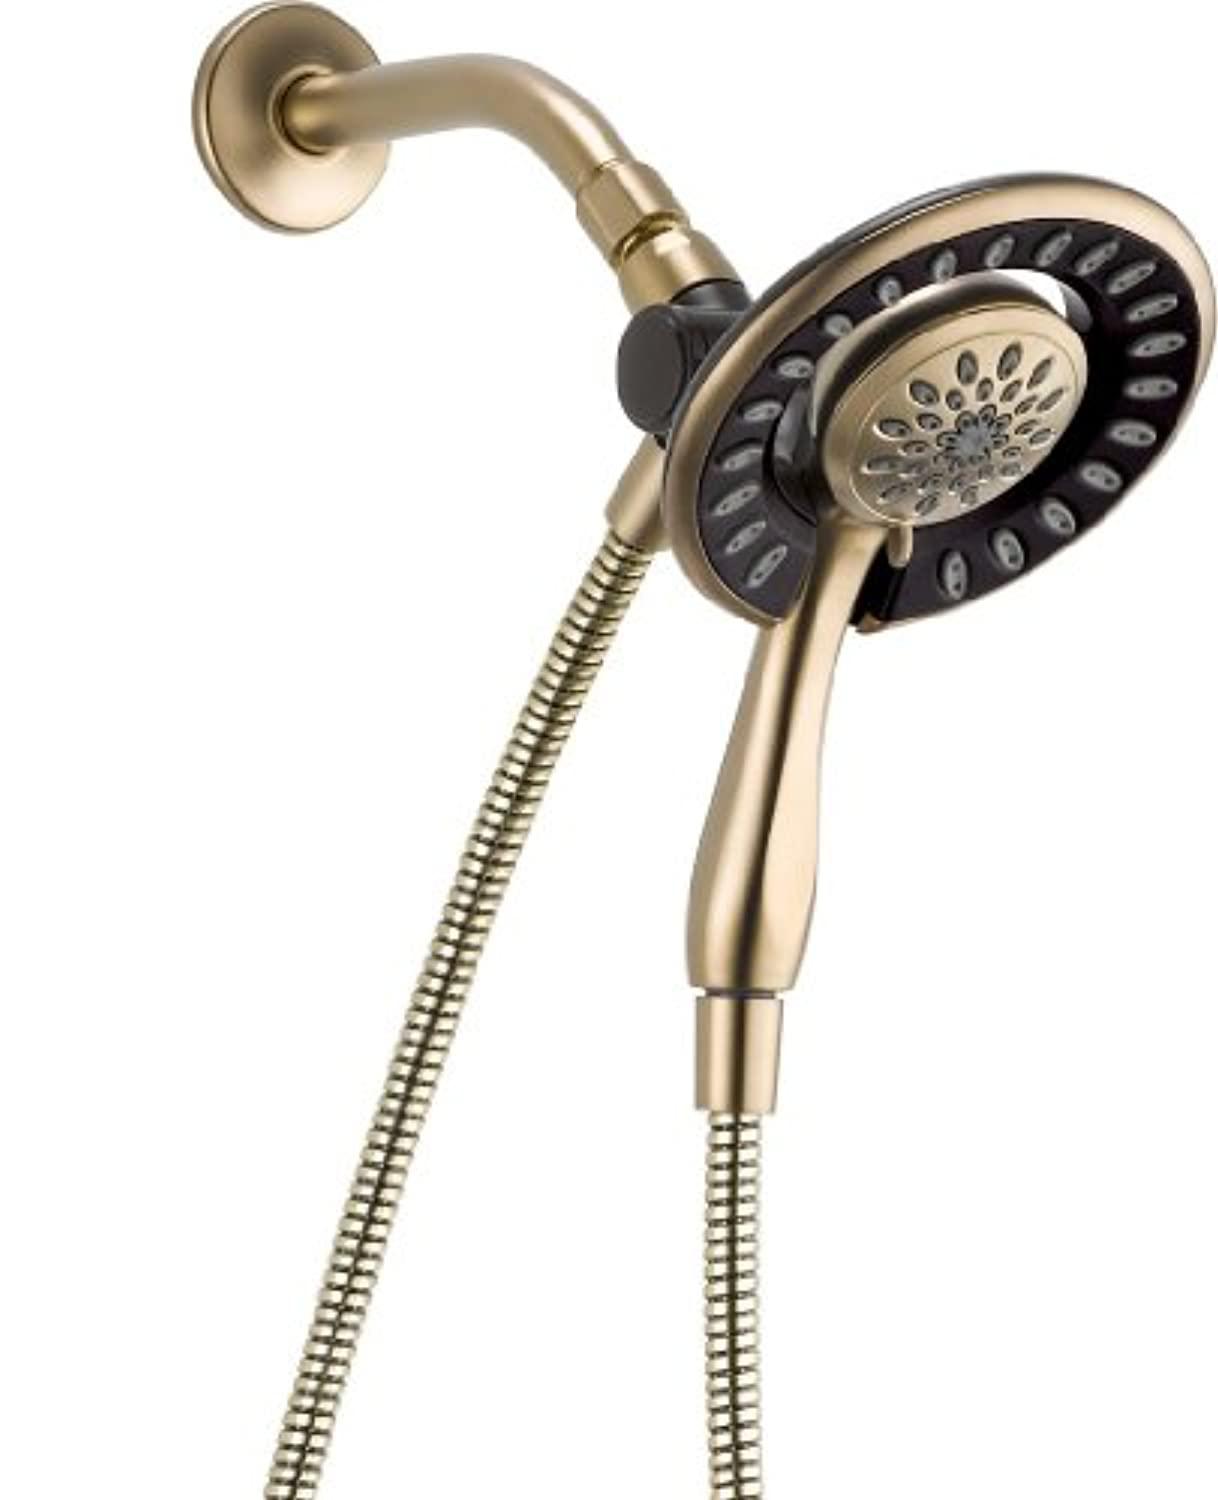 Delta Faucet delta 4-spray touch-clean in2ition 2-in-1 dual hand held shower head with hose, champagne bronze 58065-cz